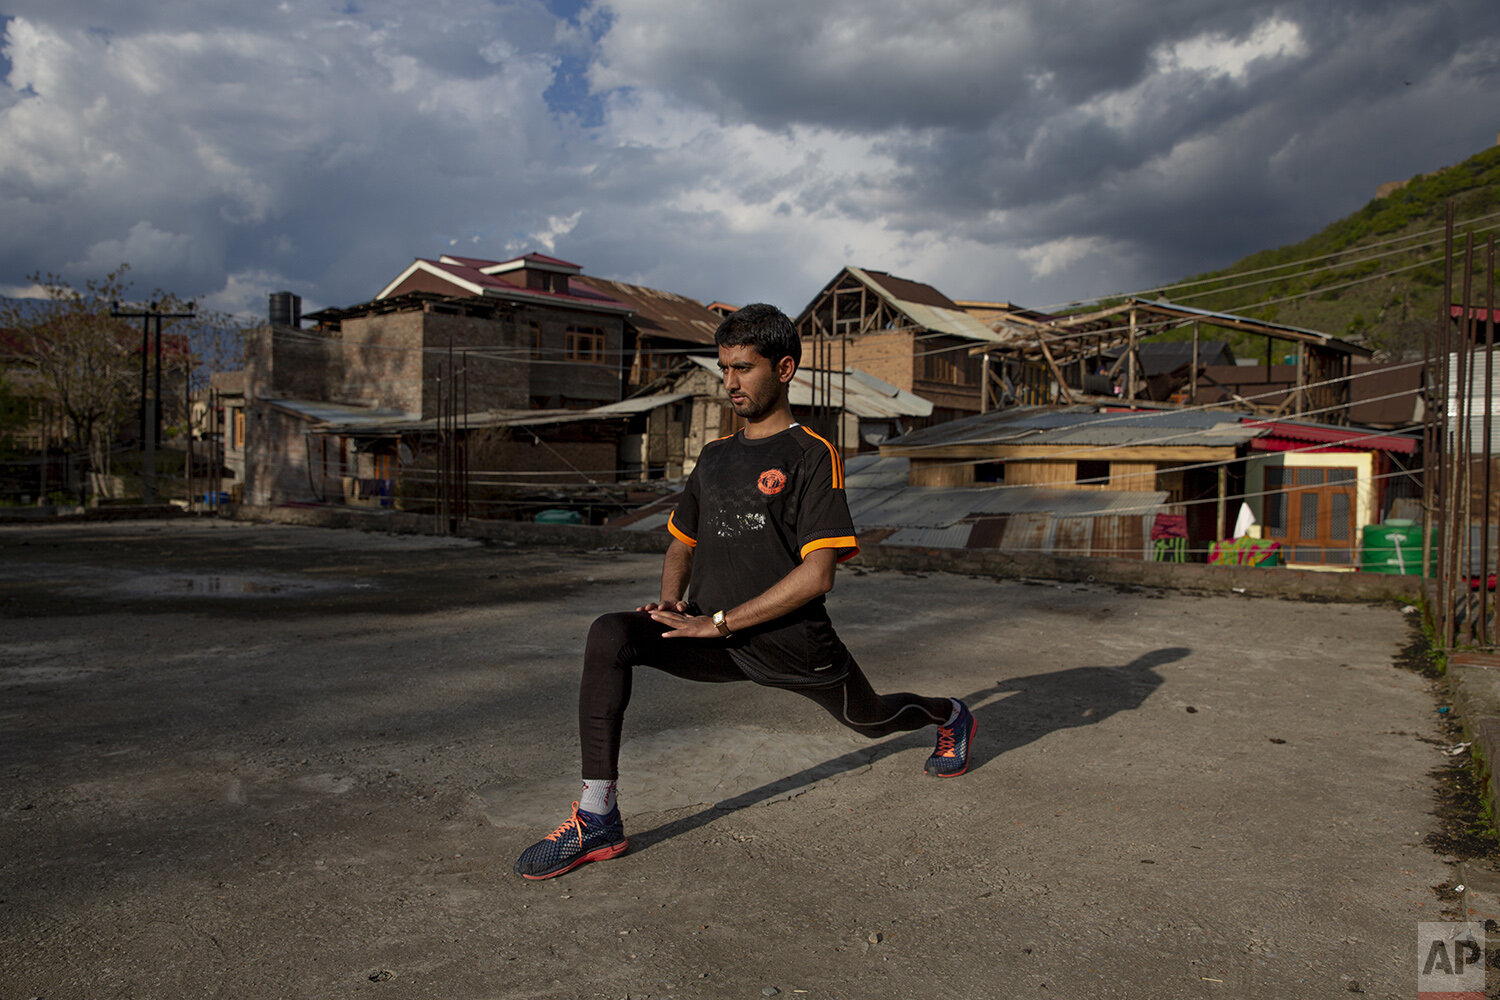  An ultra-marathon runner Hamid Aziz practices on the roof of an abandoned community hall outside his house in Srinagar Indian controlled Kashmir, April 21, 2020. Like many other athletes, the coronavirus pandemic has restricted Aziz to his home. “By